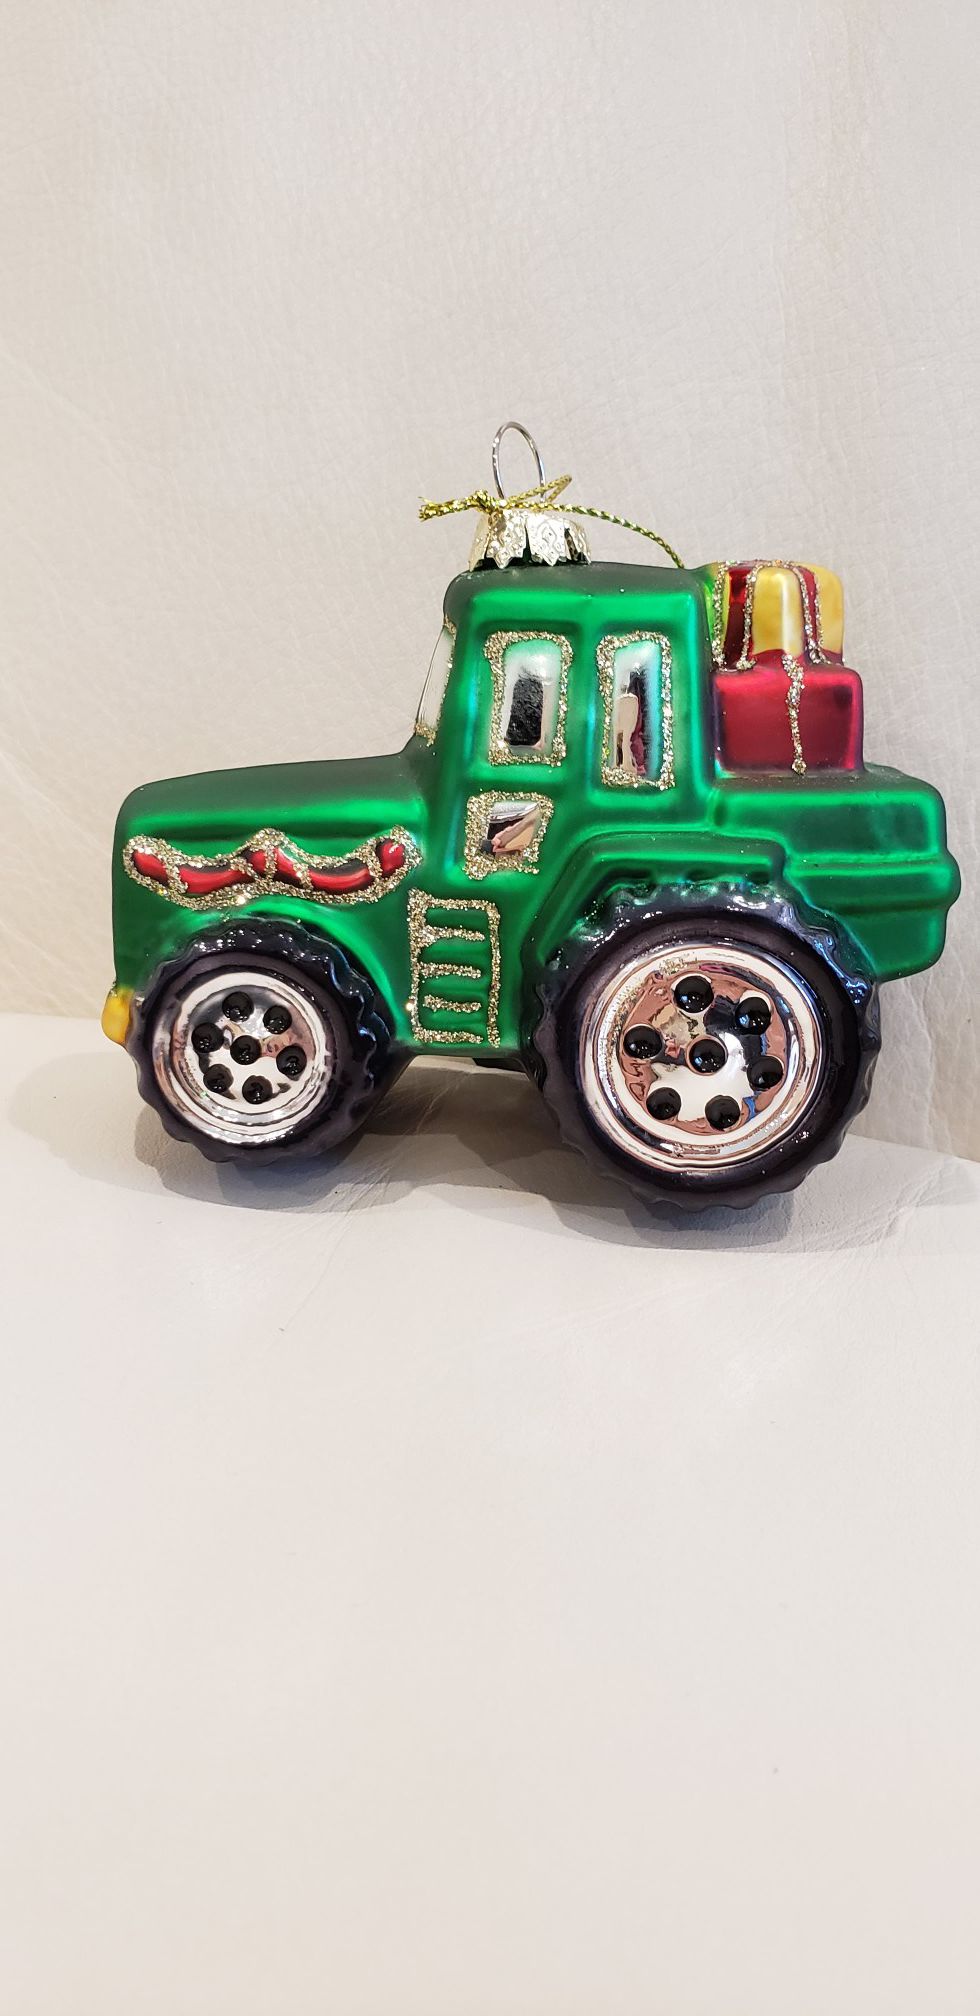 Green Farm Tractor Christmas tree ornament decoration 4x3" high quality glass tractor ornament with sparkles carrying presents. Brand new with tags